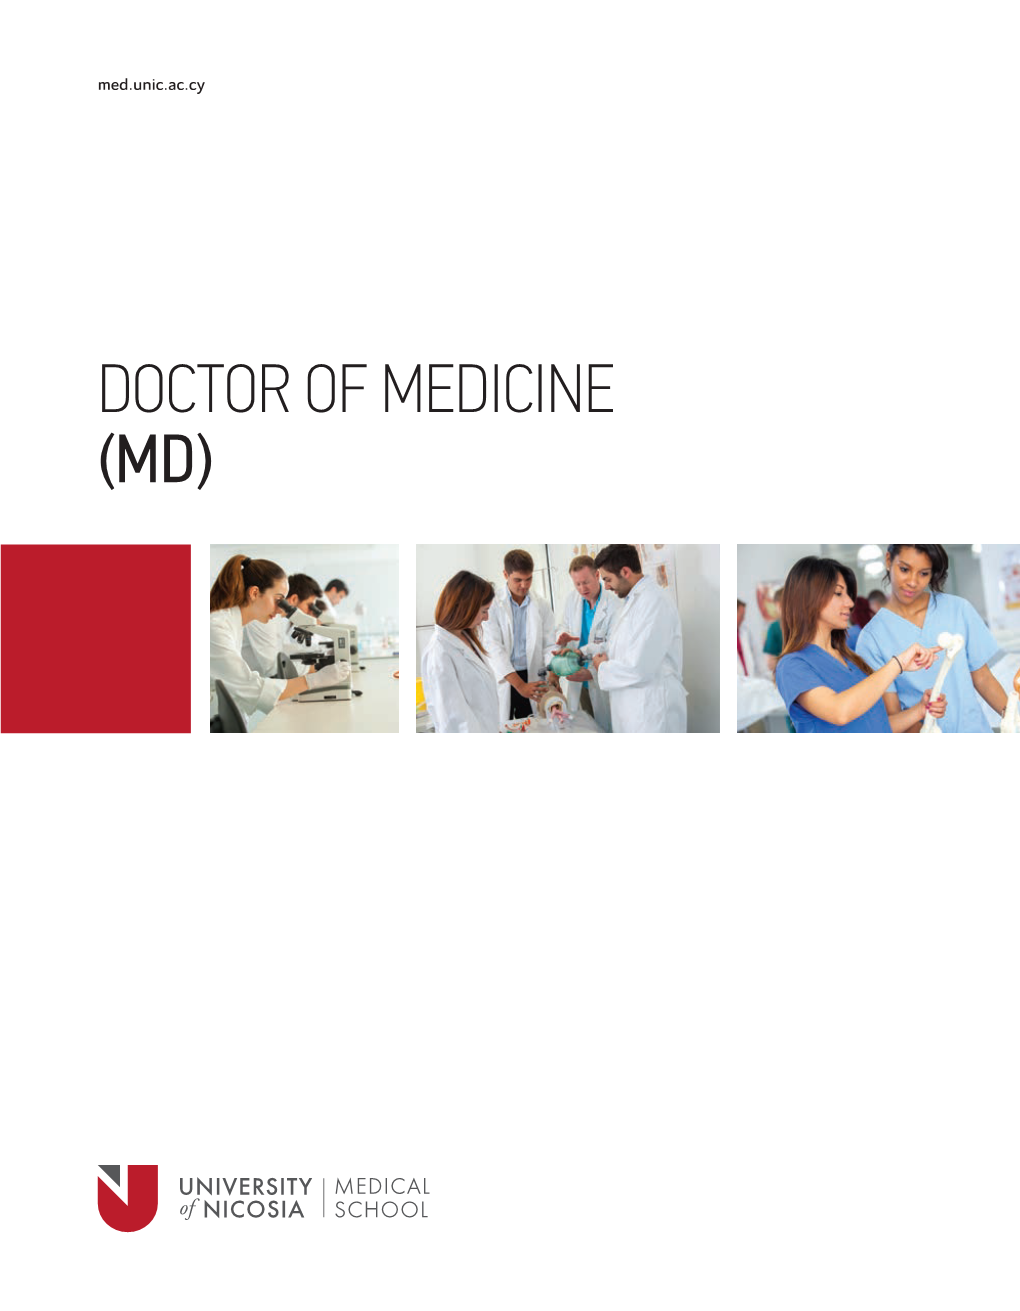 DOCTOR of MEDICINE (MD) Earn a Medical Degree from the Largest English-Language University in Southern Europe